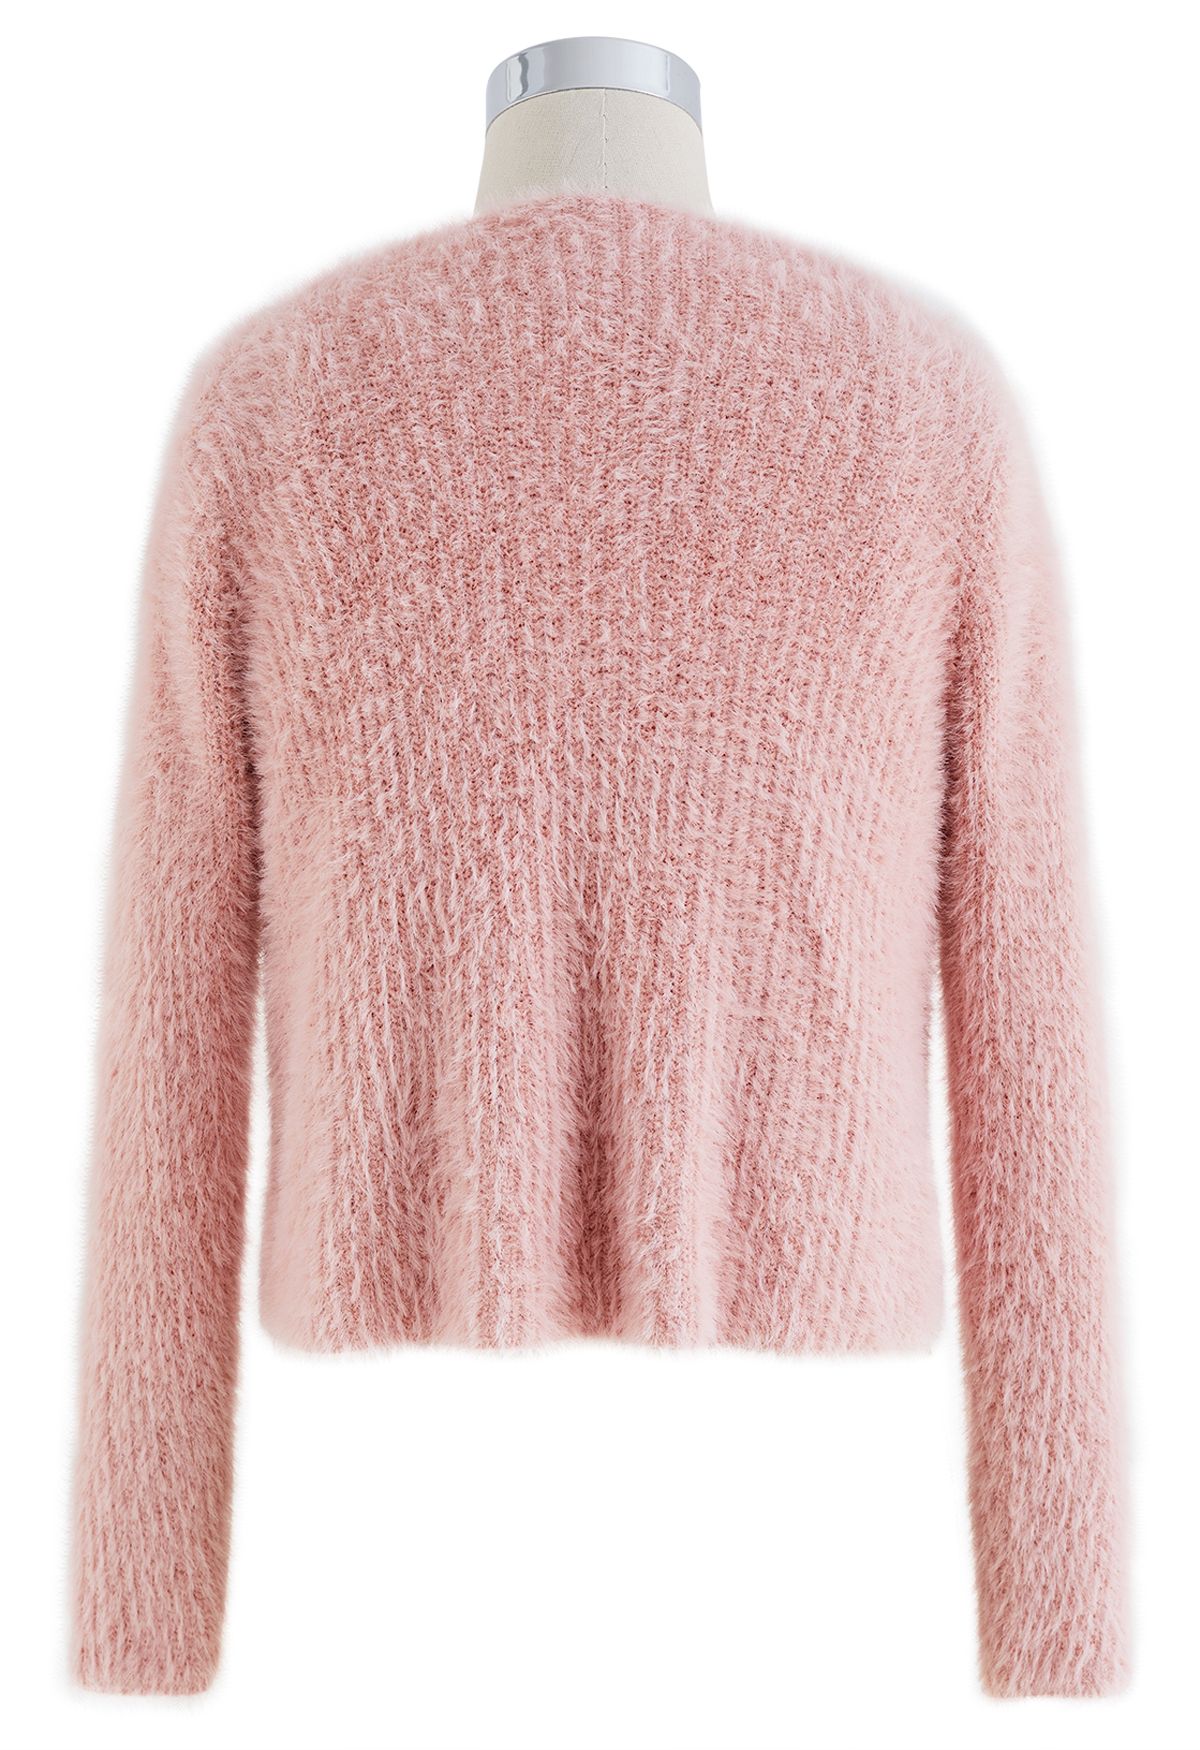 Extra Soft Fuzzy Knit Cami Top and Cardigan Set in Pink